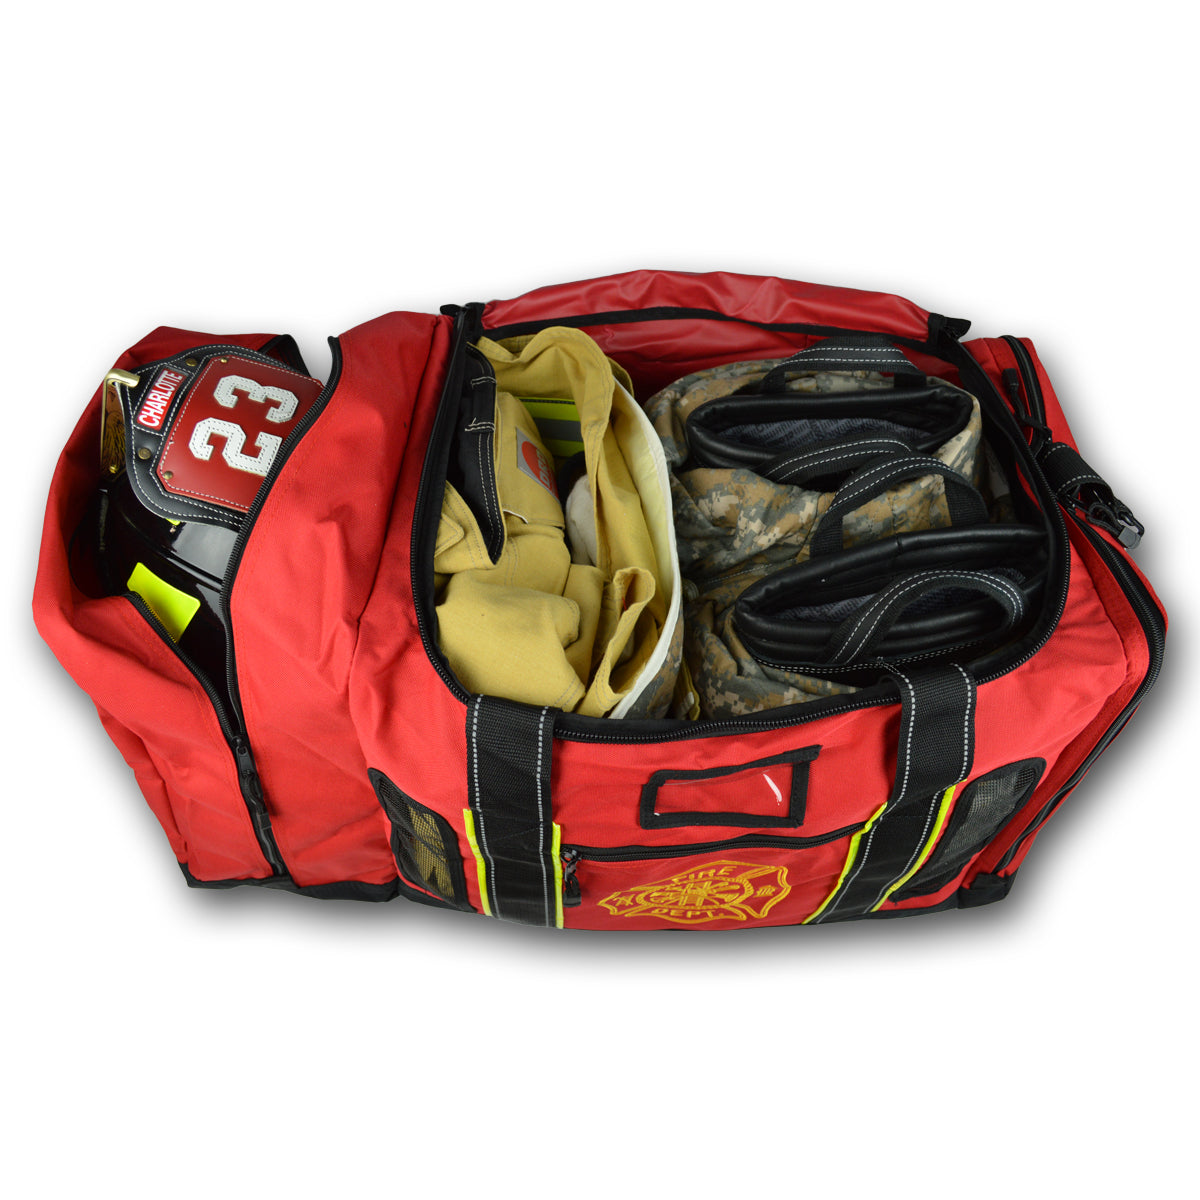 Lightning X Quad-Vent Turnout Gear Bag (LXFB45M) | The Fire Center | Fuego Fire Center | Store | FIREFIGHTER GEAR | FREE SHIPPING | Lightning X Products has been making quality public safety bags for nearly 15 years. From time to time we get the urge to improve upon existing bag designs